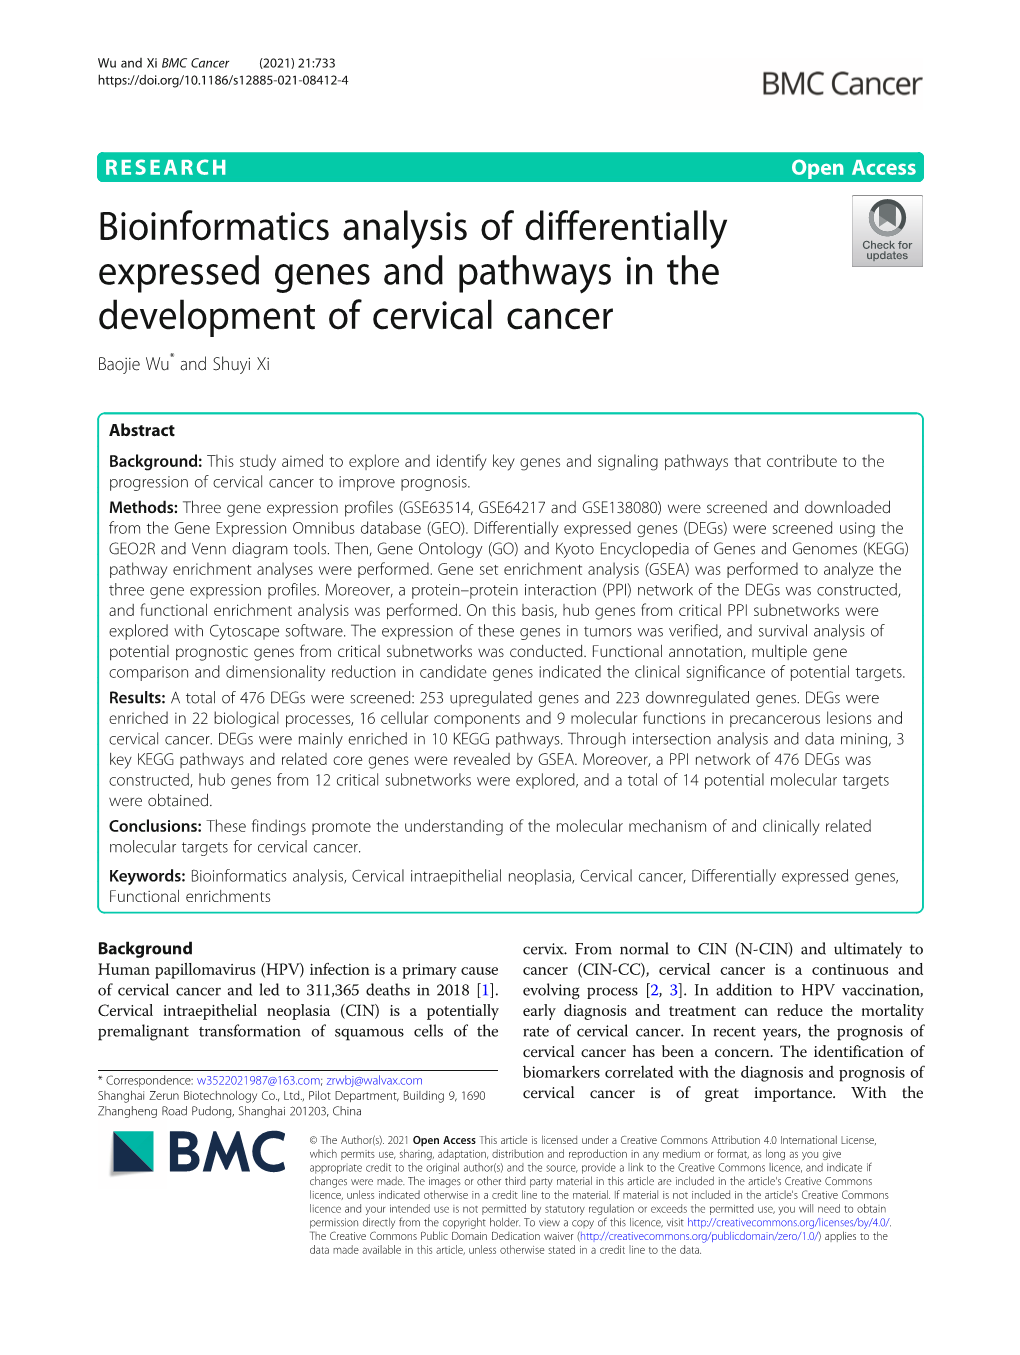 Bioinformatics Analysis of Differentially Expressed Genes and Pathways in the Development of Cervical Cancer Baojie Wu* and Shuyi Xi